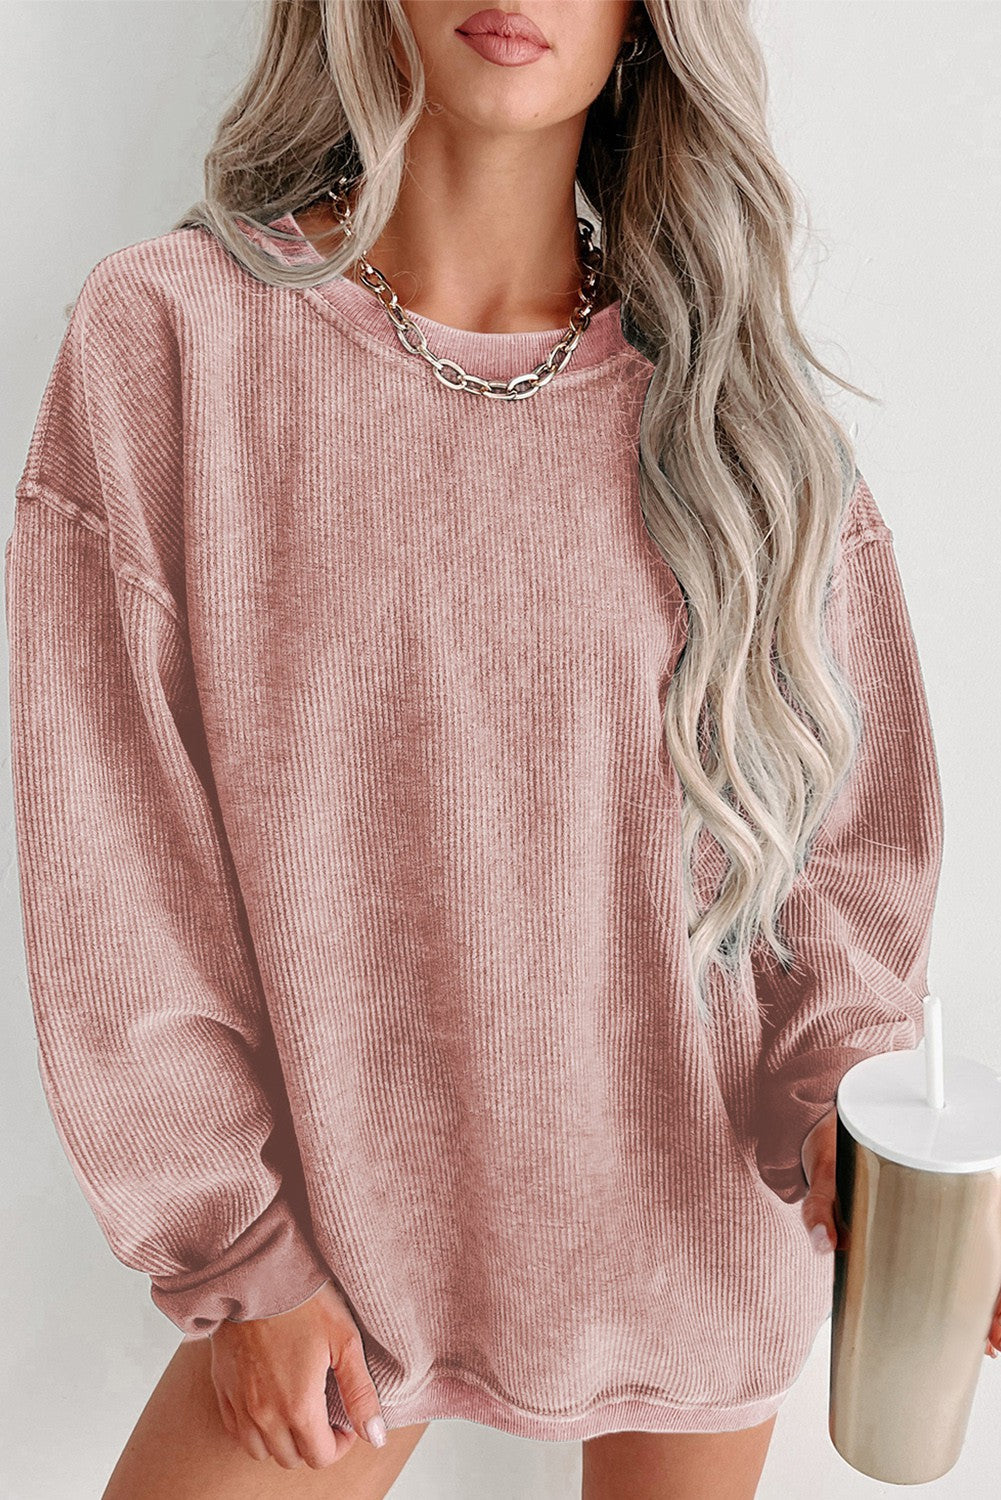 Picture Perfect Pullover in Multiple Colors